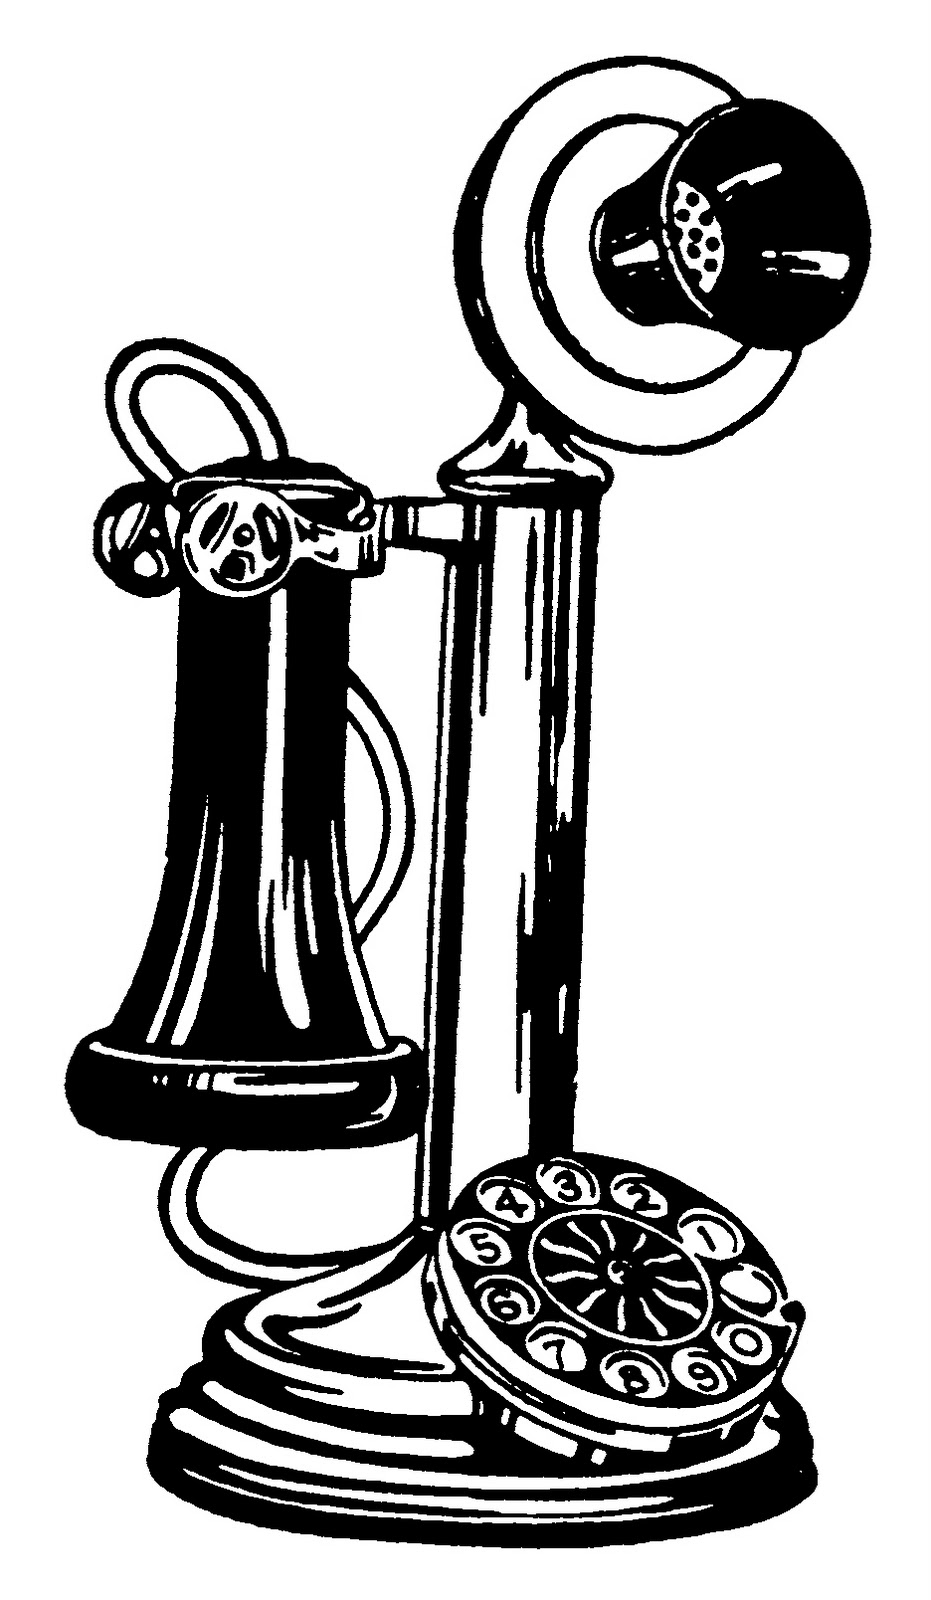 Free black and white. Telephone clipart vintage telephone